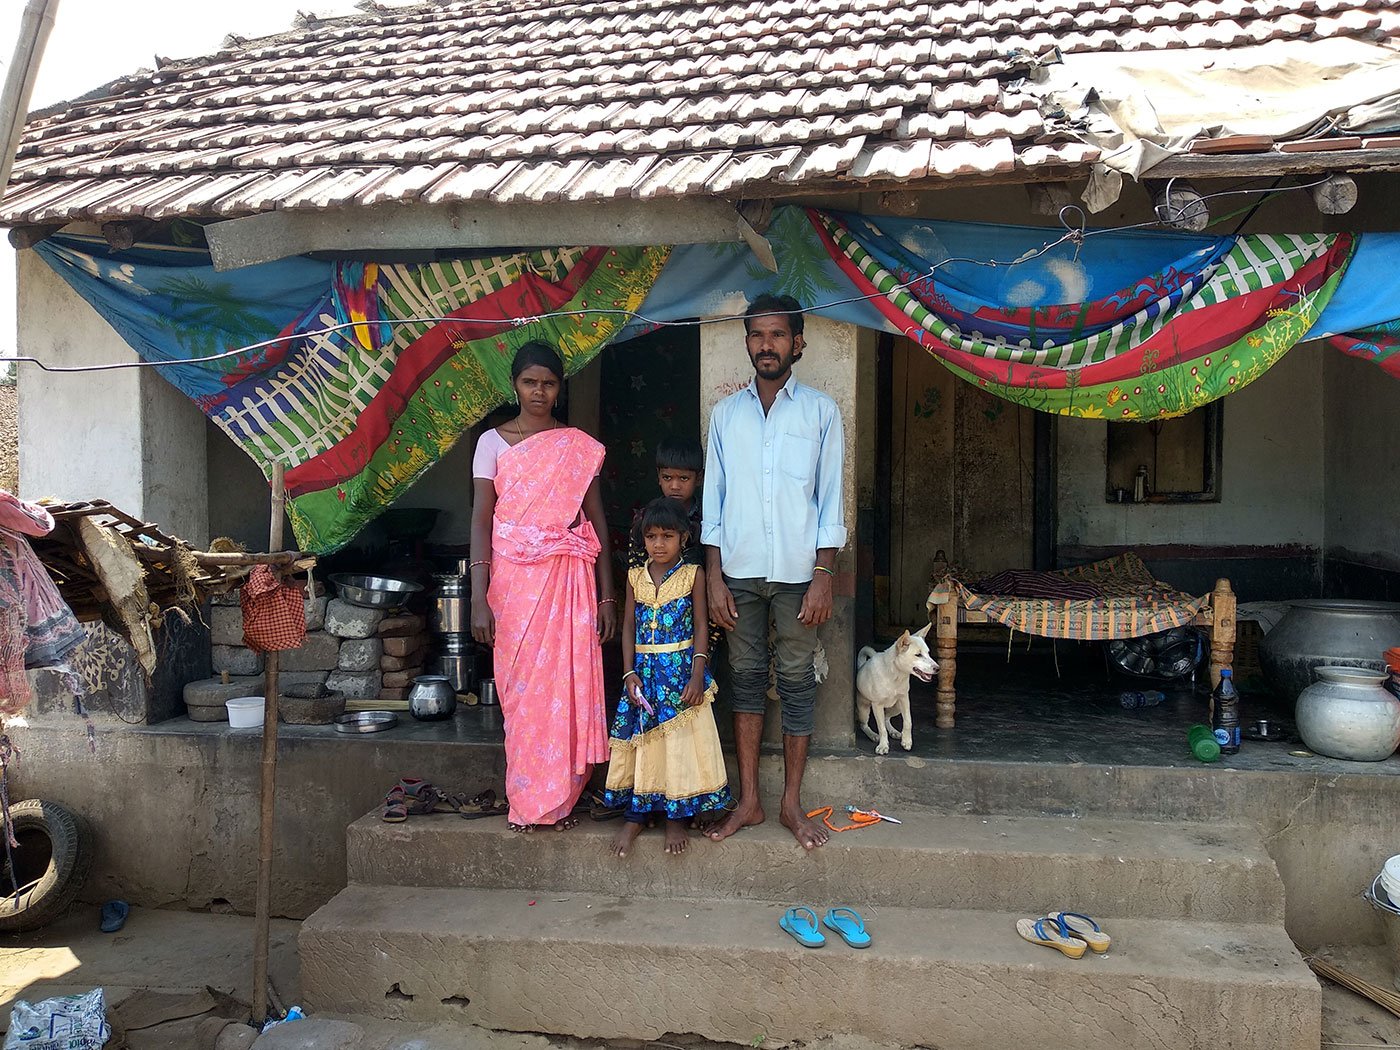 Sridevi, Smiley, Prashanth and Suryachandram, in front of their house in Pydipaka